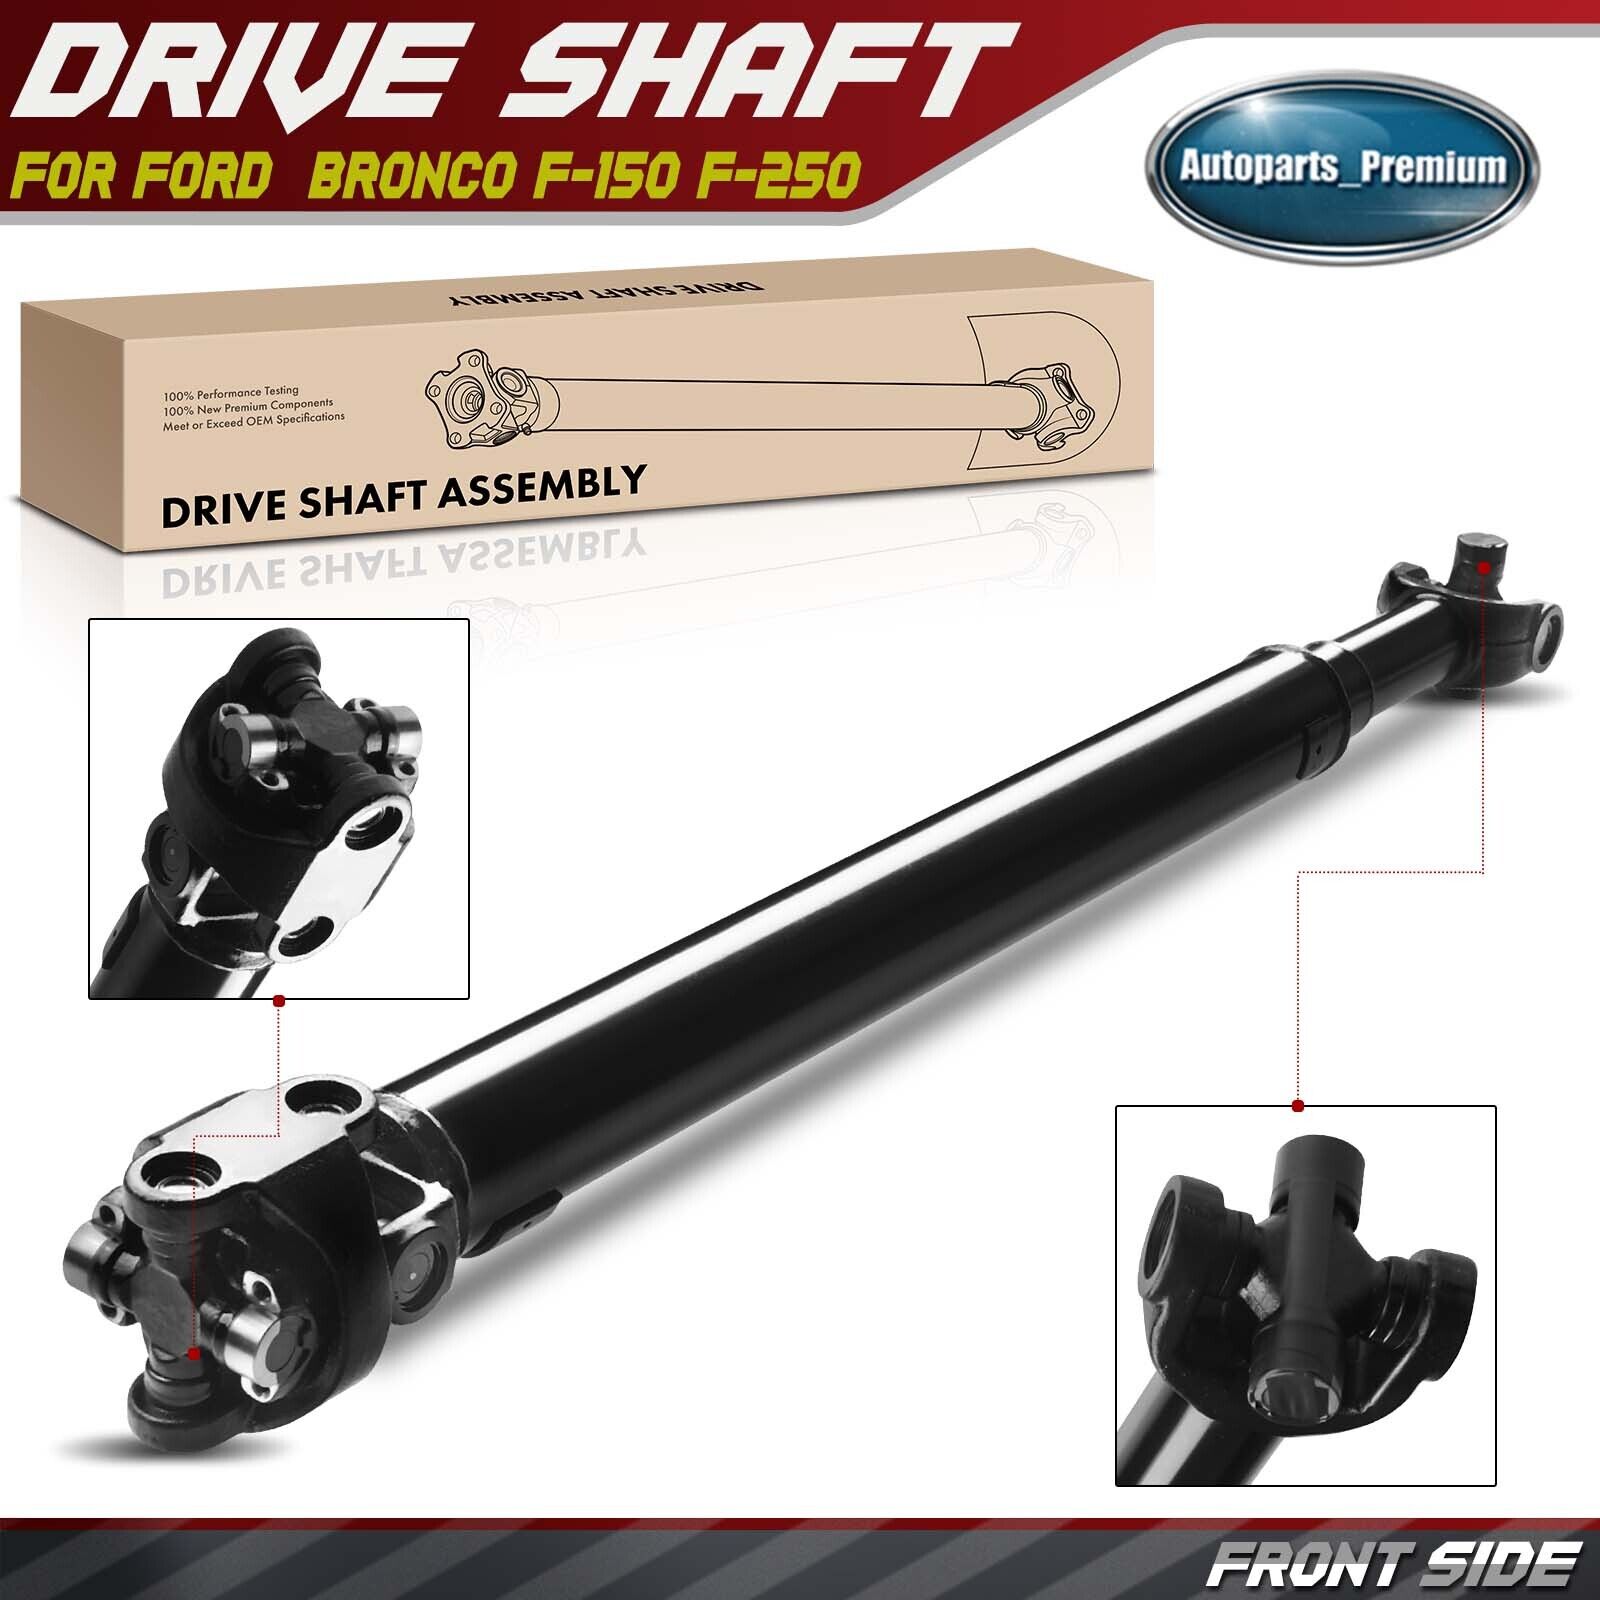 Front Driveshaft Prop Shaft Assembly for Ford F-150 F-250 1988-1996 Bronco 4WD